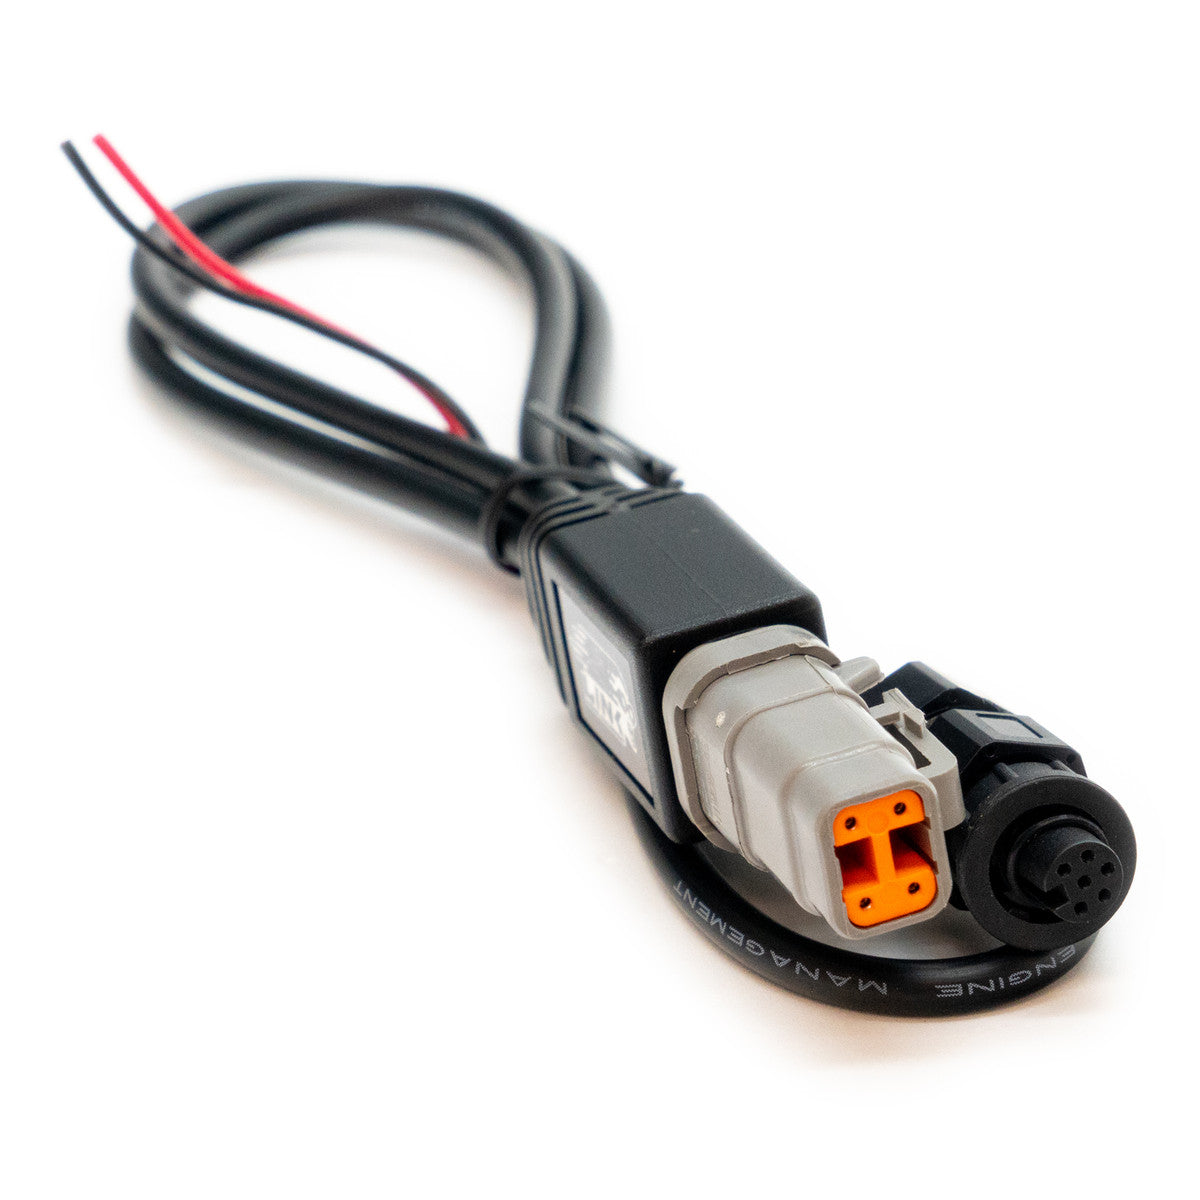 Link ECU CANLTW - CAN Connection Cable for WireIn ECU’s (6Pin CAN)